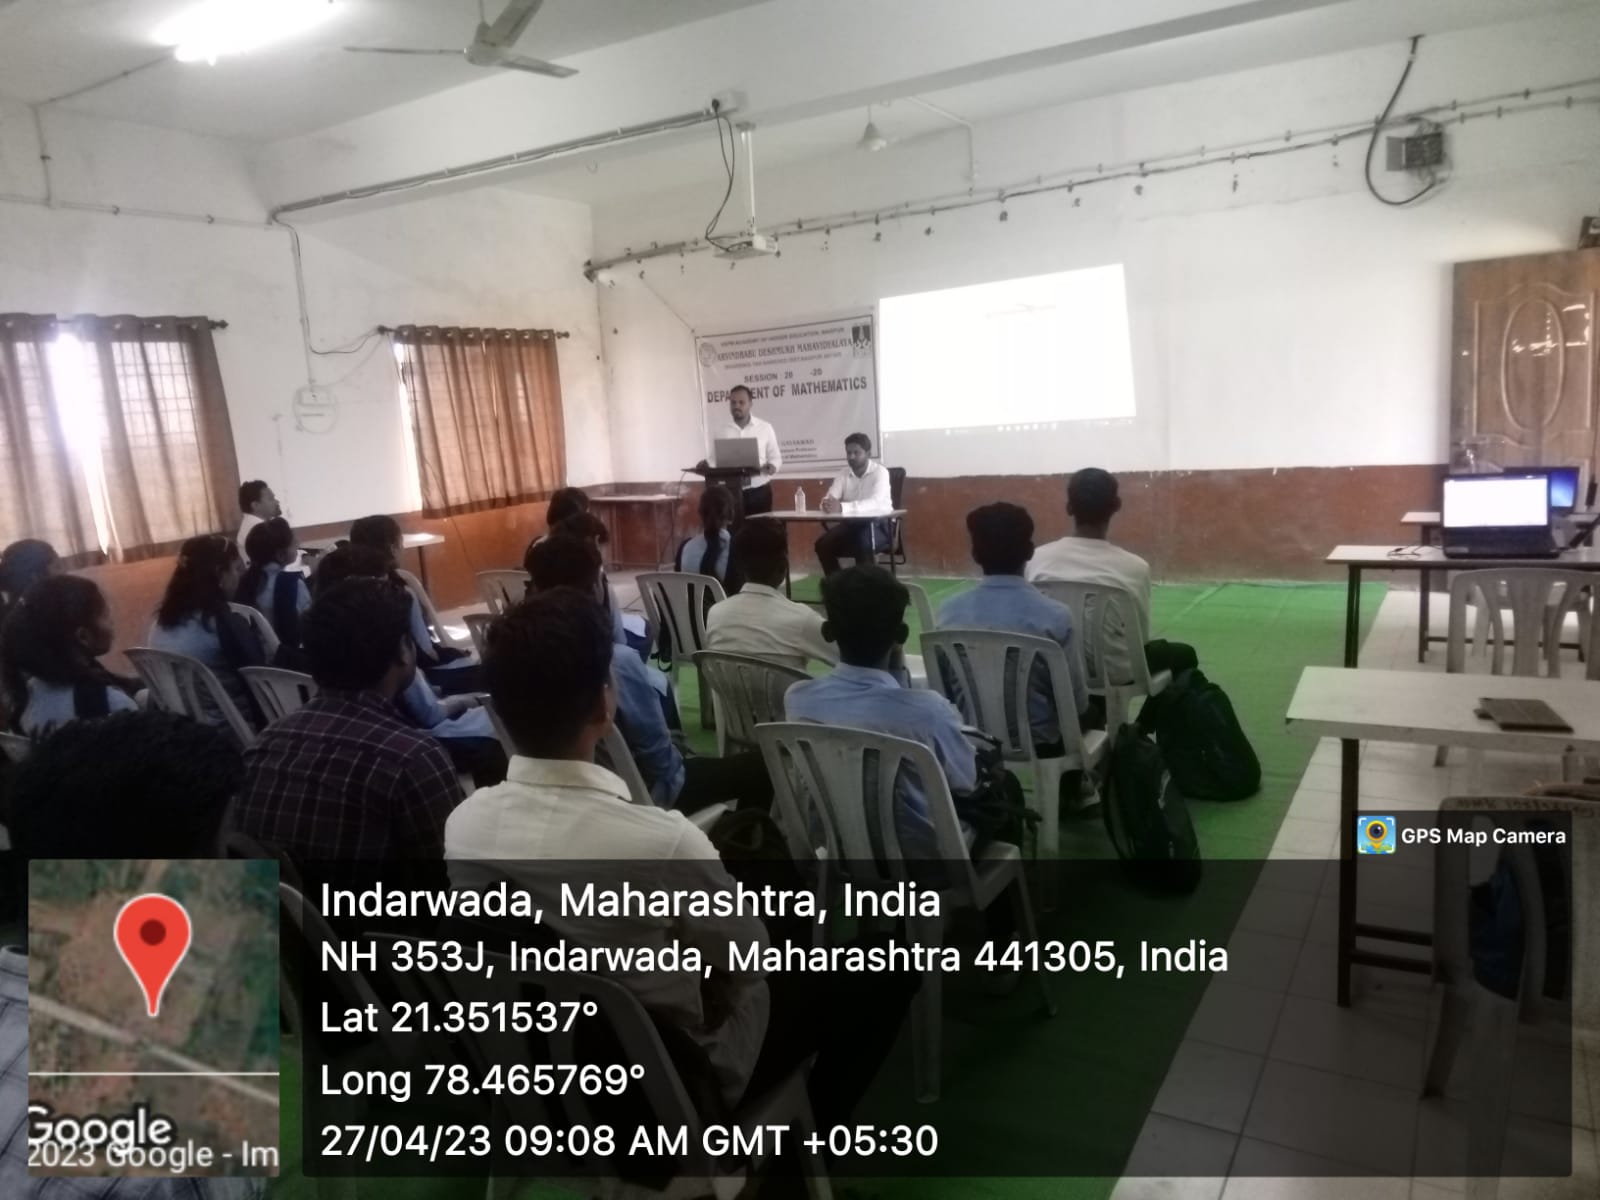 <p>Department of Mathematics orgnaized workshop on &#39;Writing Mathematical Equations and Plot a Graph&#39; on 26th April 2023. The guest for the said workshop is Mr. Pravin P Sayare, Assistant Professor, Department of Mathematics, Institute of Sceince, Nagpur. The timing of the program is 8.30-10.00 am fully for the students of our college semester II &amp; semester&nbsp;IV students to develop&nbsp;the skill amongst them and motivate to improve in the subject.&nbsp;</p>
